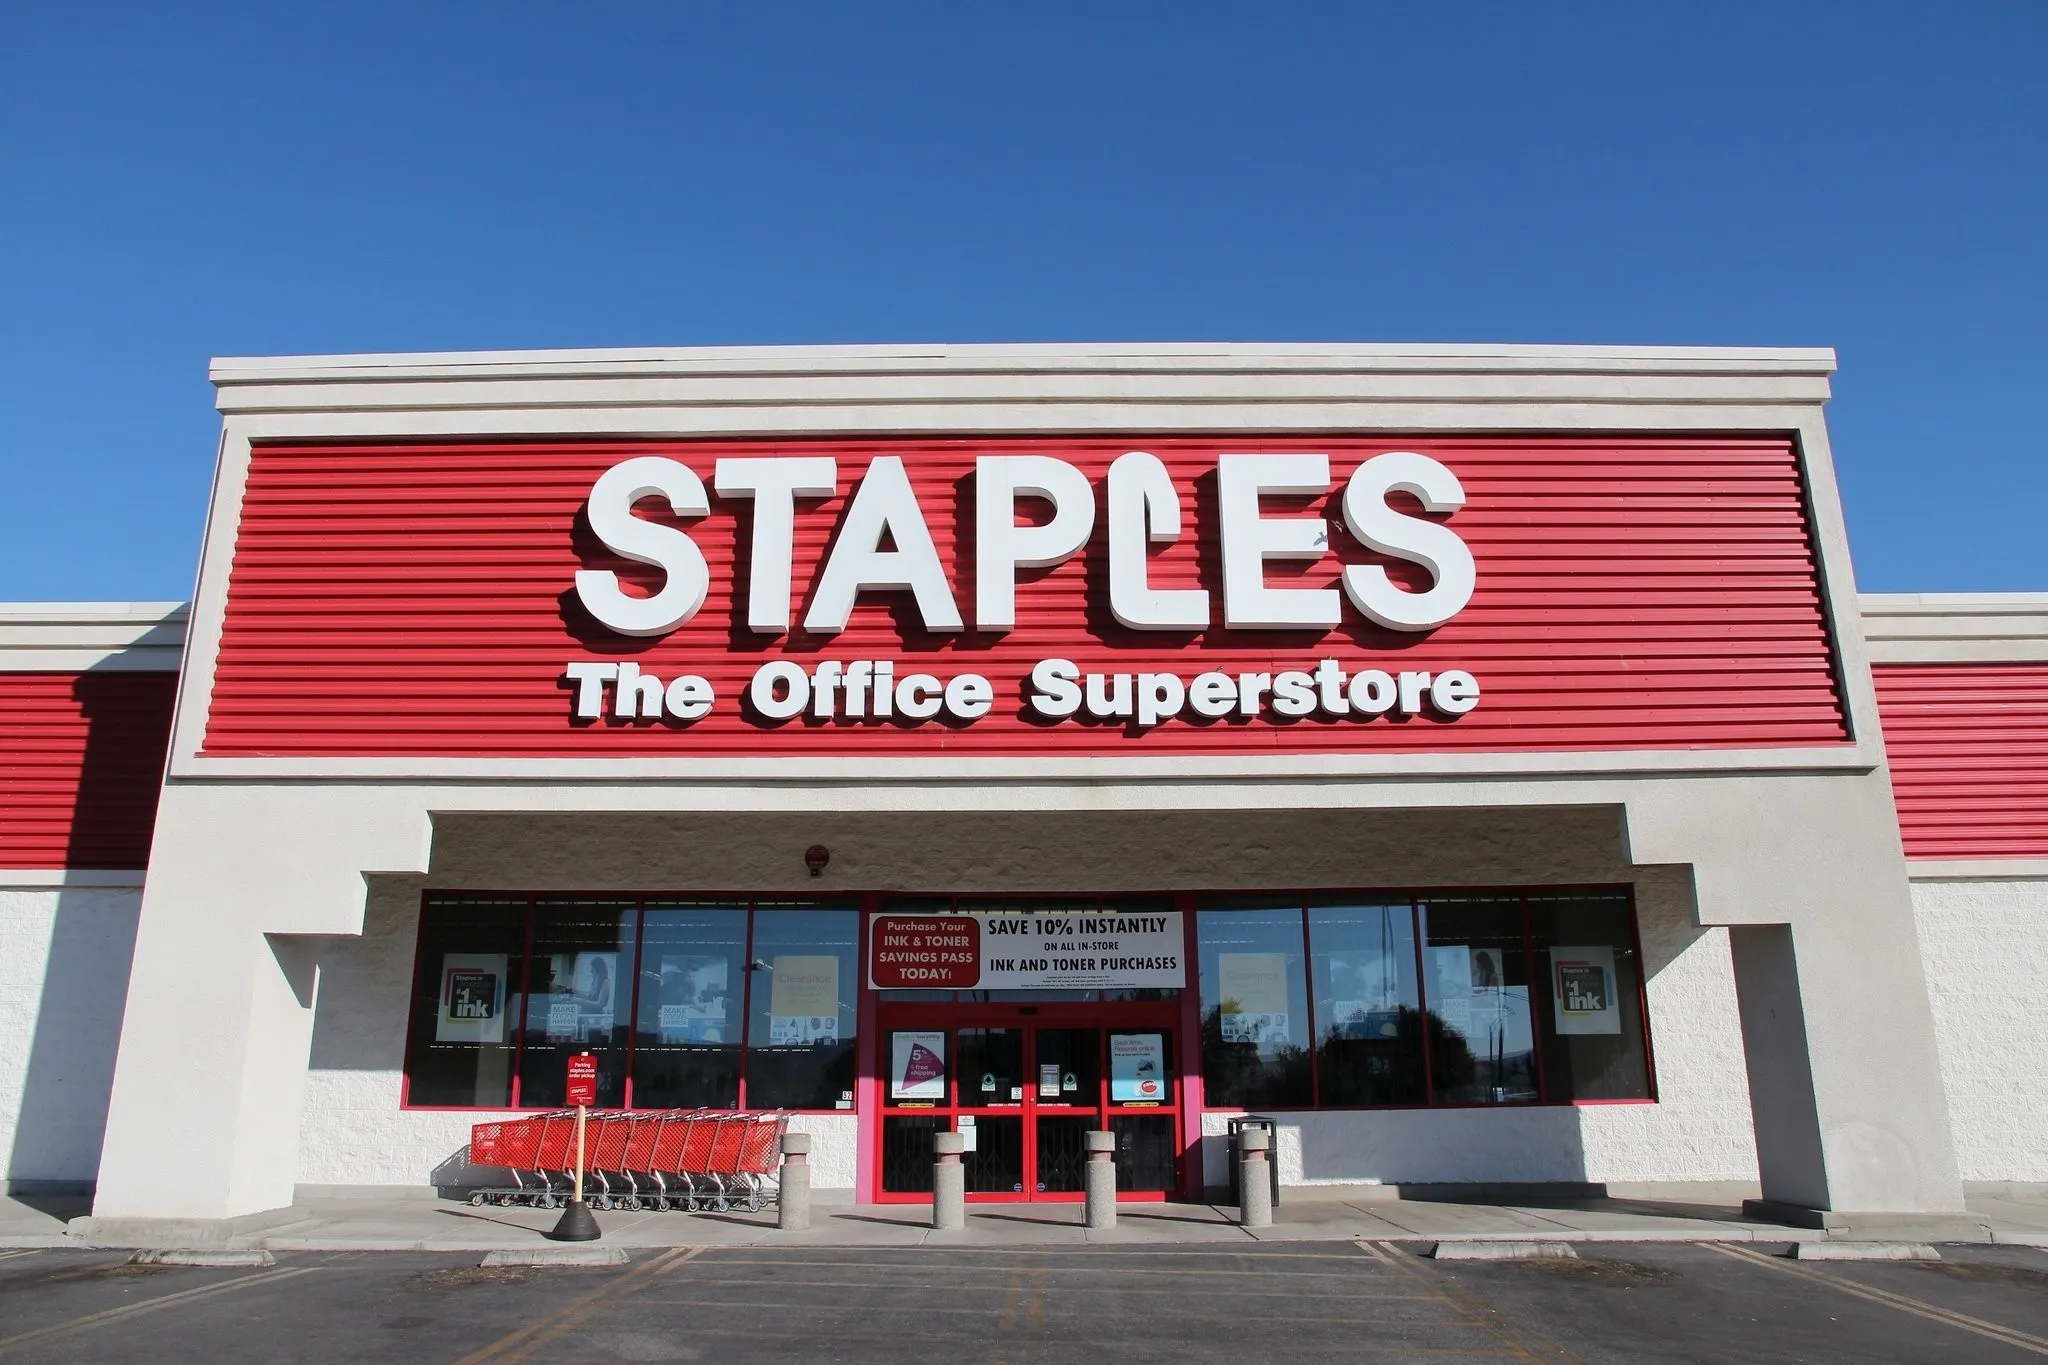 How to Find Staples Hours